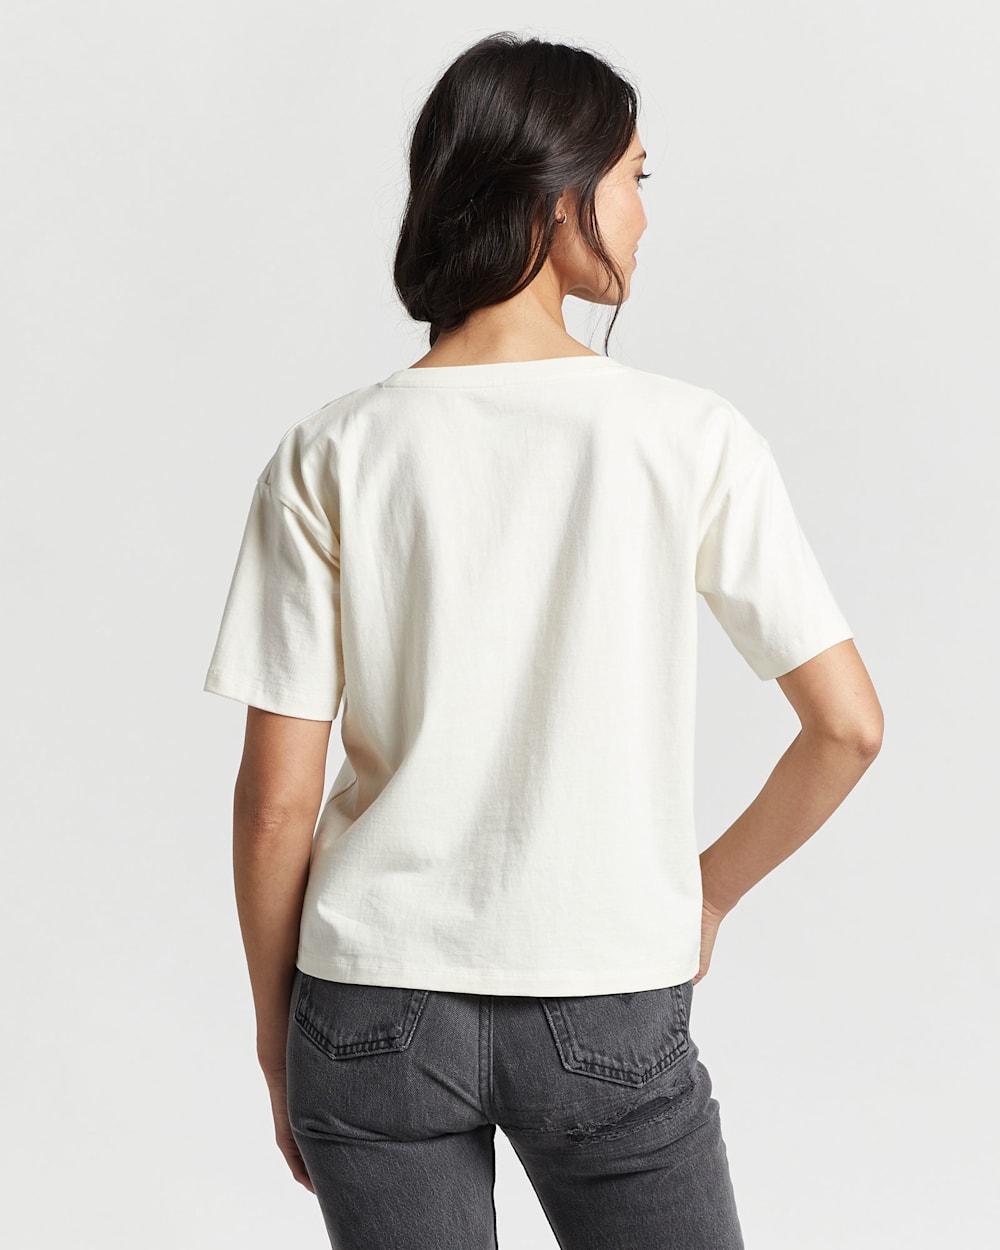 WOMEN'S CROPPED DESCHUTES GRAPHIC TEE IN ANTIQUE WHITE HARDING image number 3